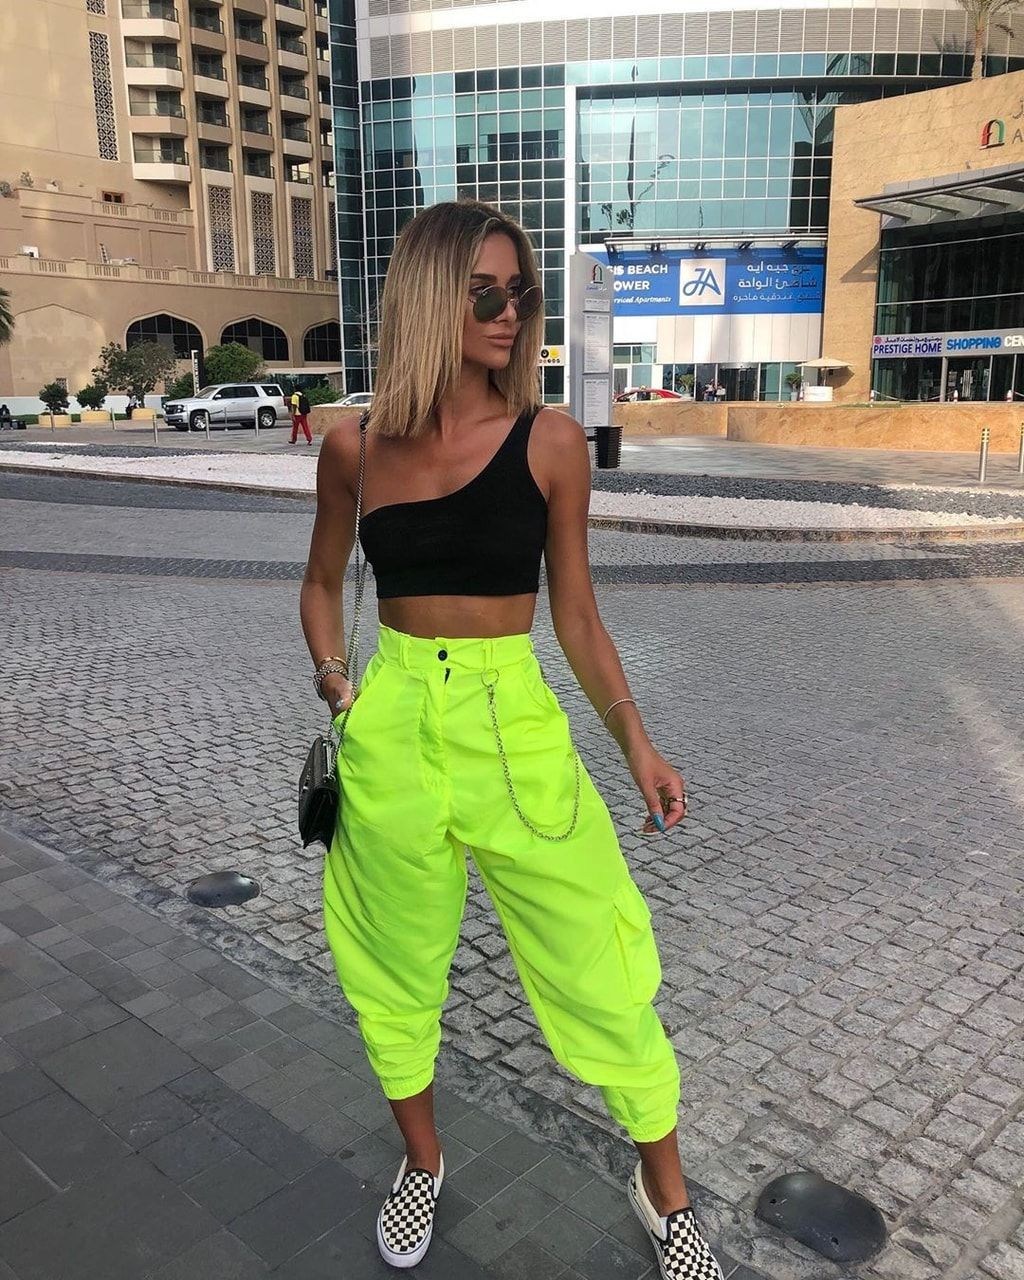 Picture of: ♡ 𝗣𝗶𝗻𝘁𝗲𝗿𝗲𝘀𝘁 ; @𝗻𝗶𝗲𝗻𝘅𝗰 ♡  Neon outfits, Neon